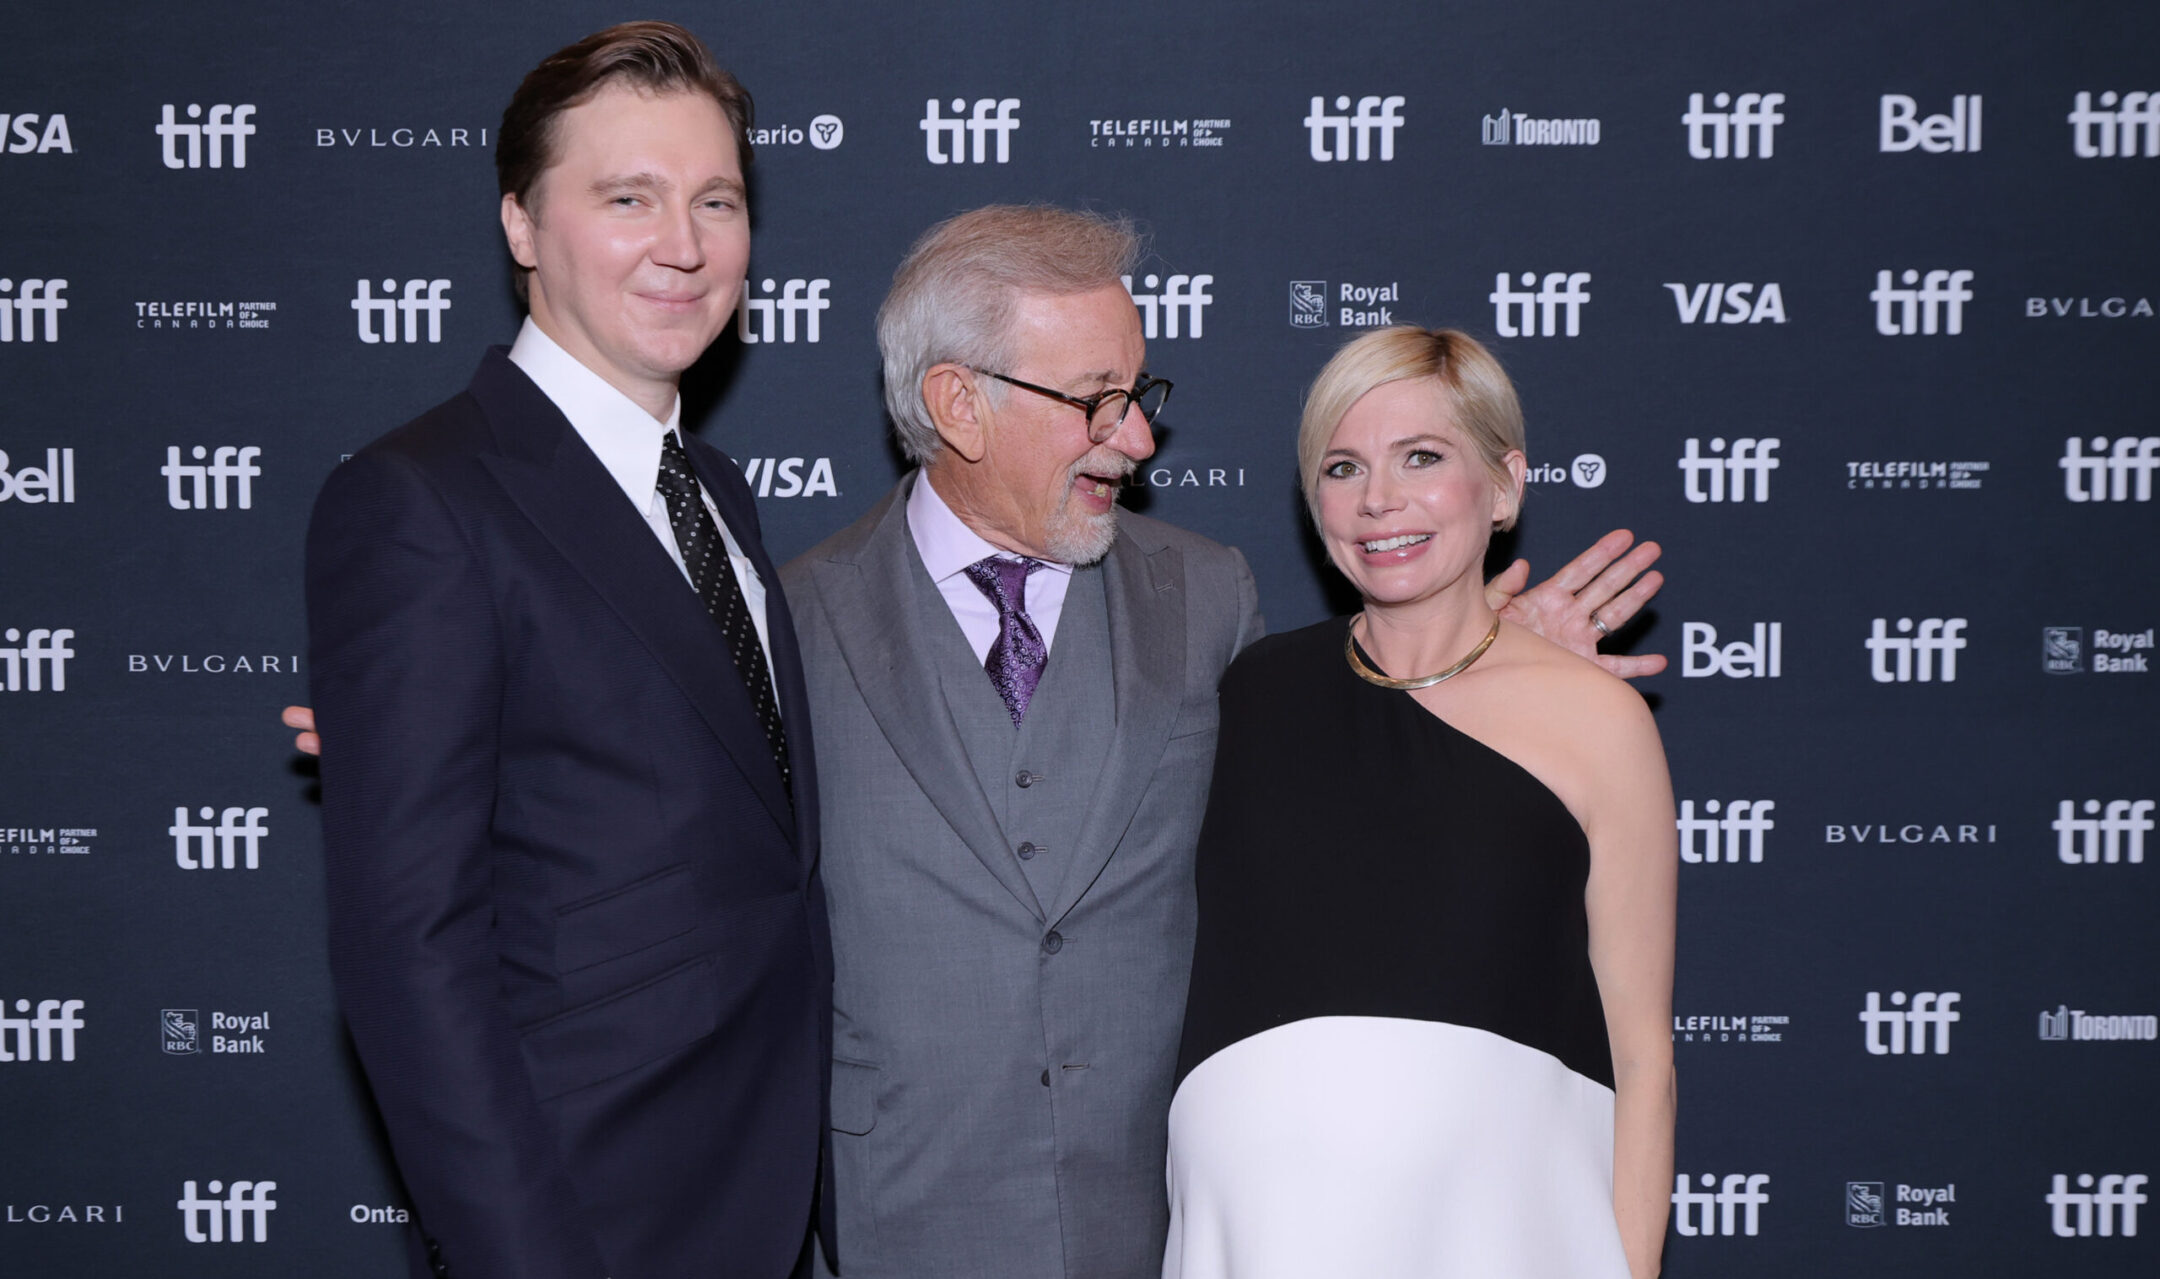 Michelle Williams, who plays Steven Spielberg’s mother in ‘The Fabelmans,’ says she plans to raise her children Jewish